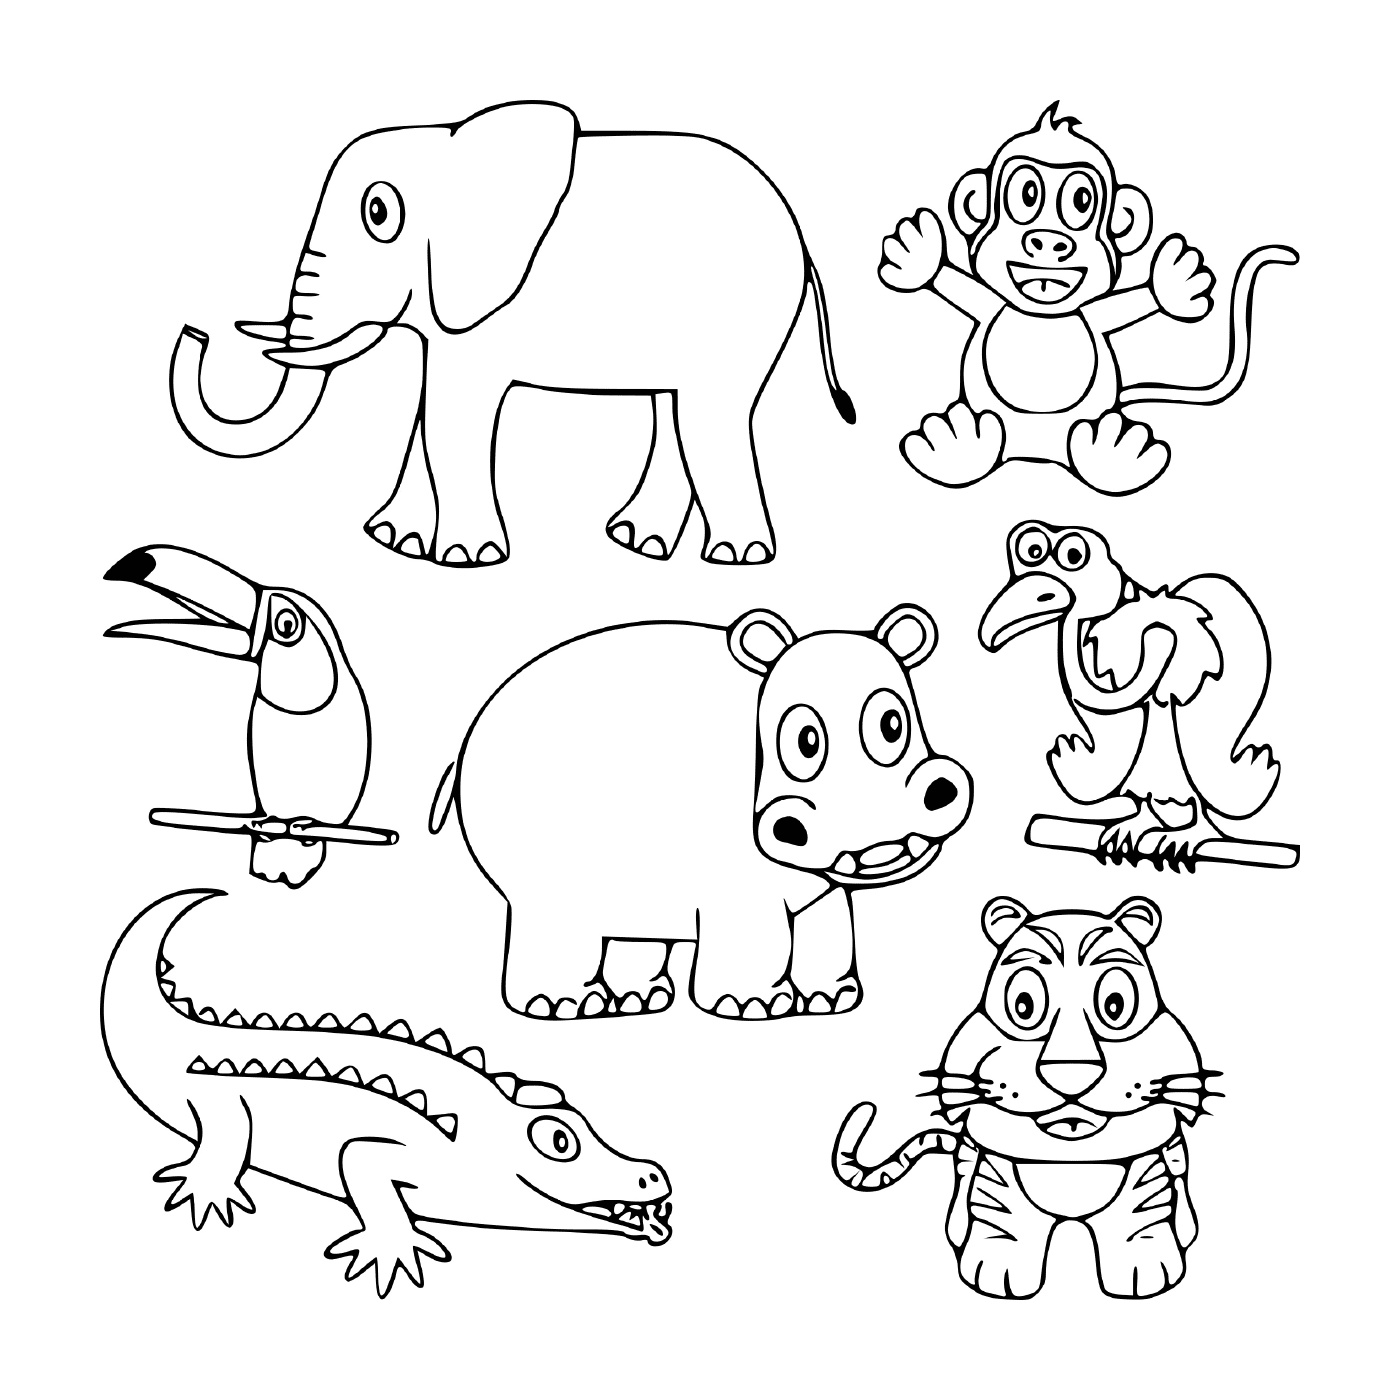  A set of zoo animals 